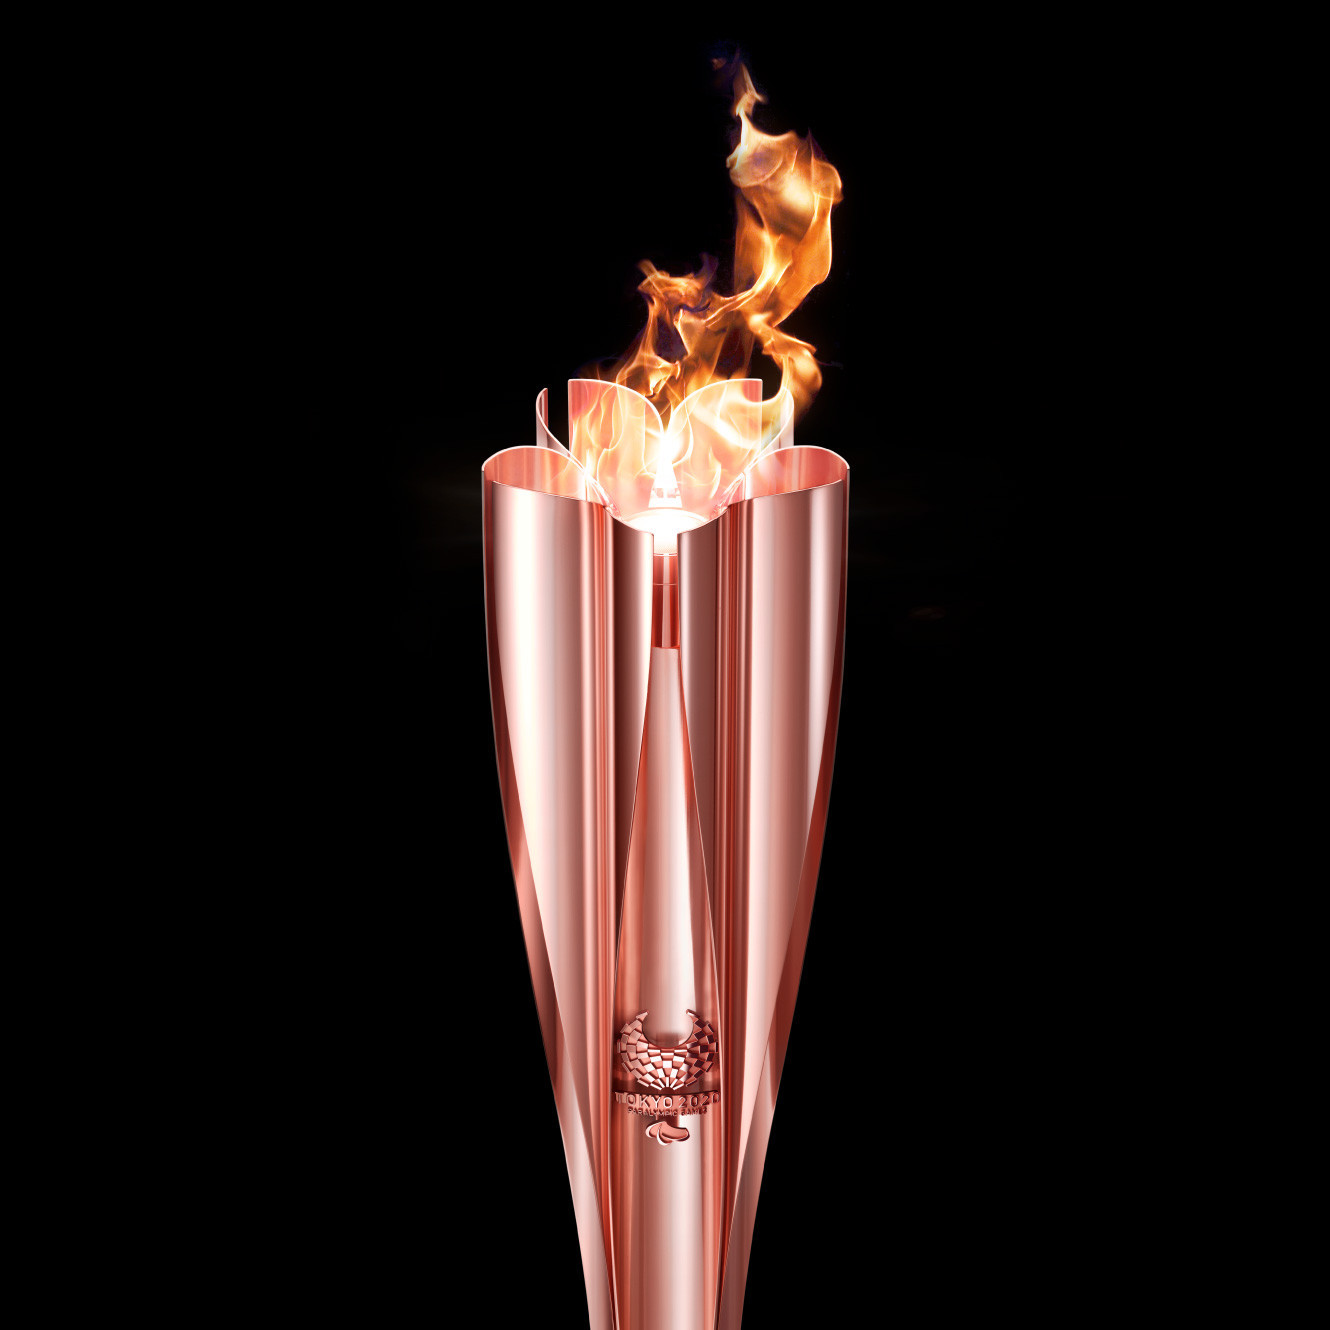 JXTG Nippon Oil & Energy Corporation are to supply the gas for the Paralympic Torch Relay for Tokyo 2020 ©Tokyo 2020